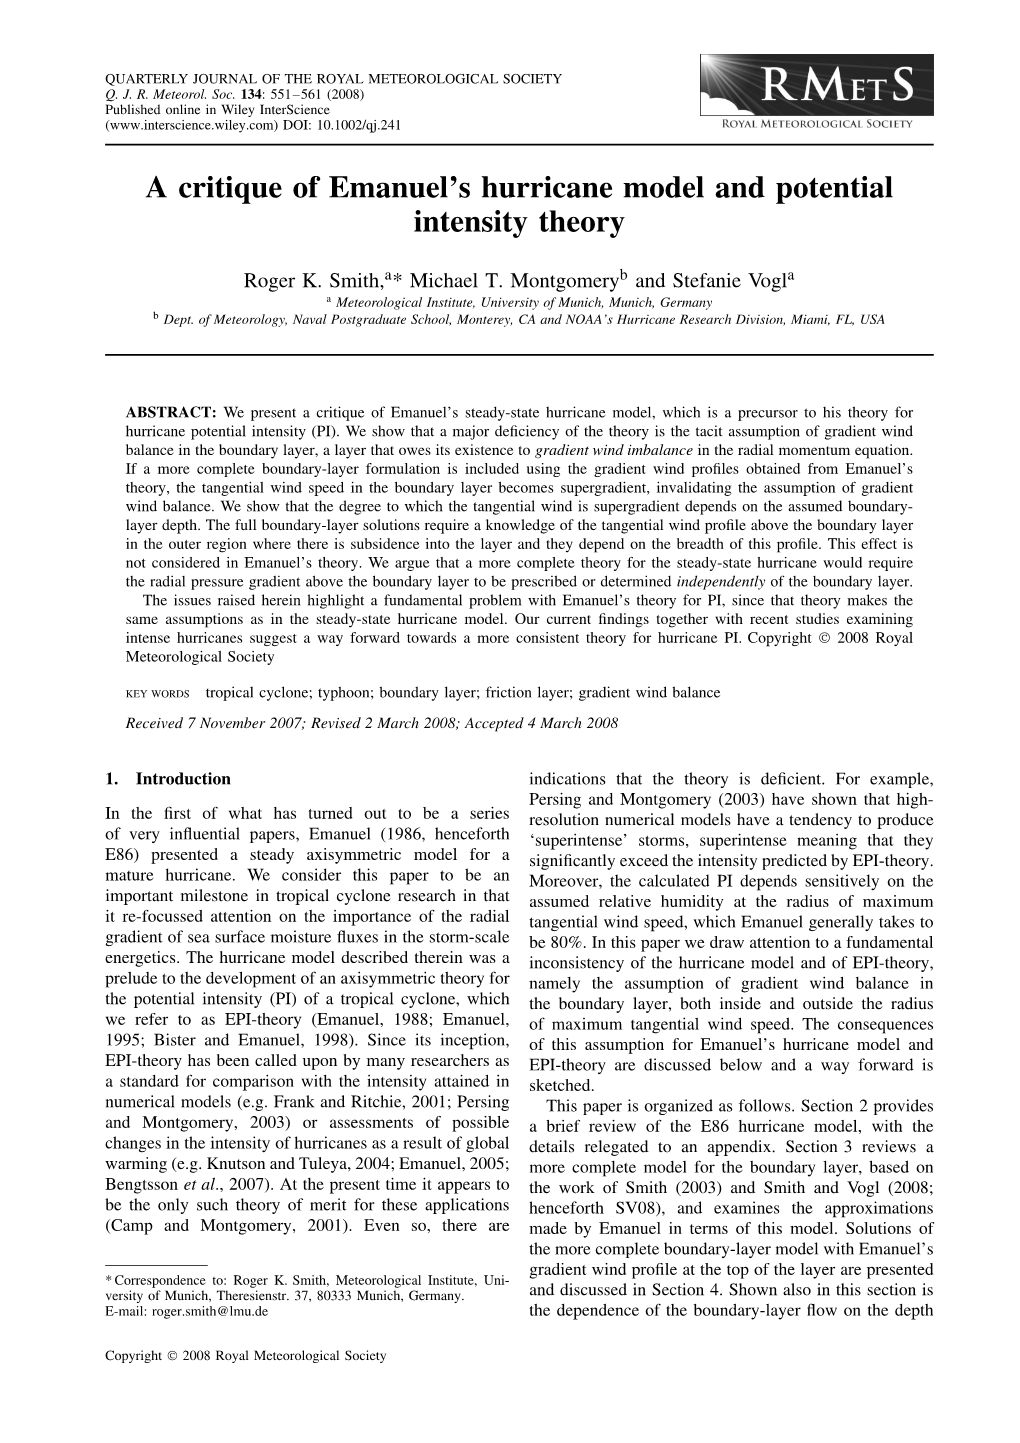 A Critique of Emanuel's Hurricane Model and Potential Intensity Theory